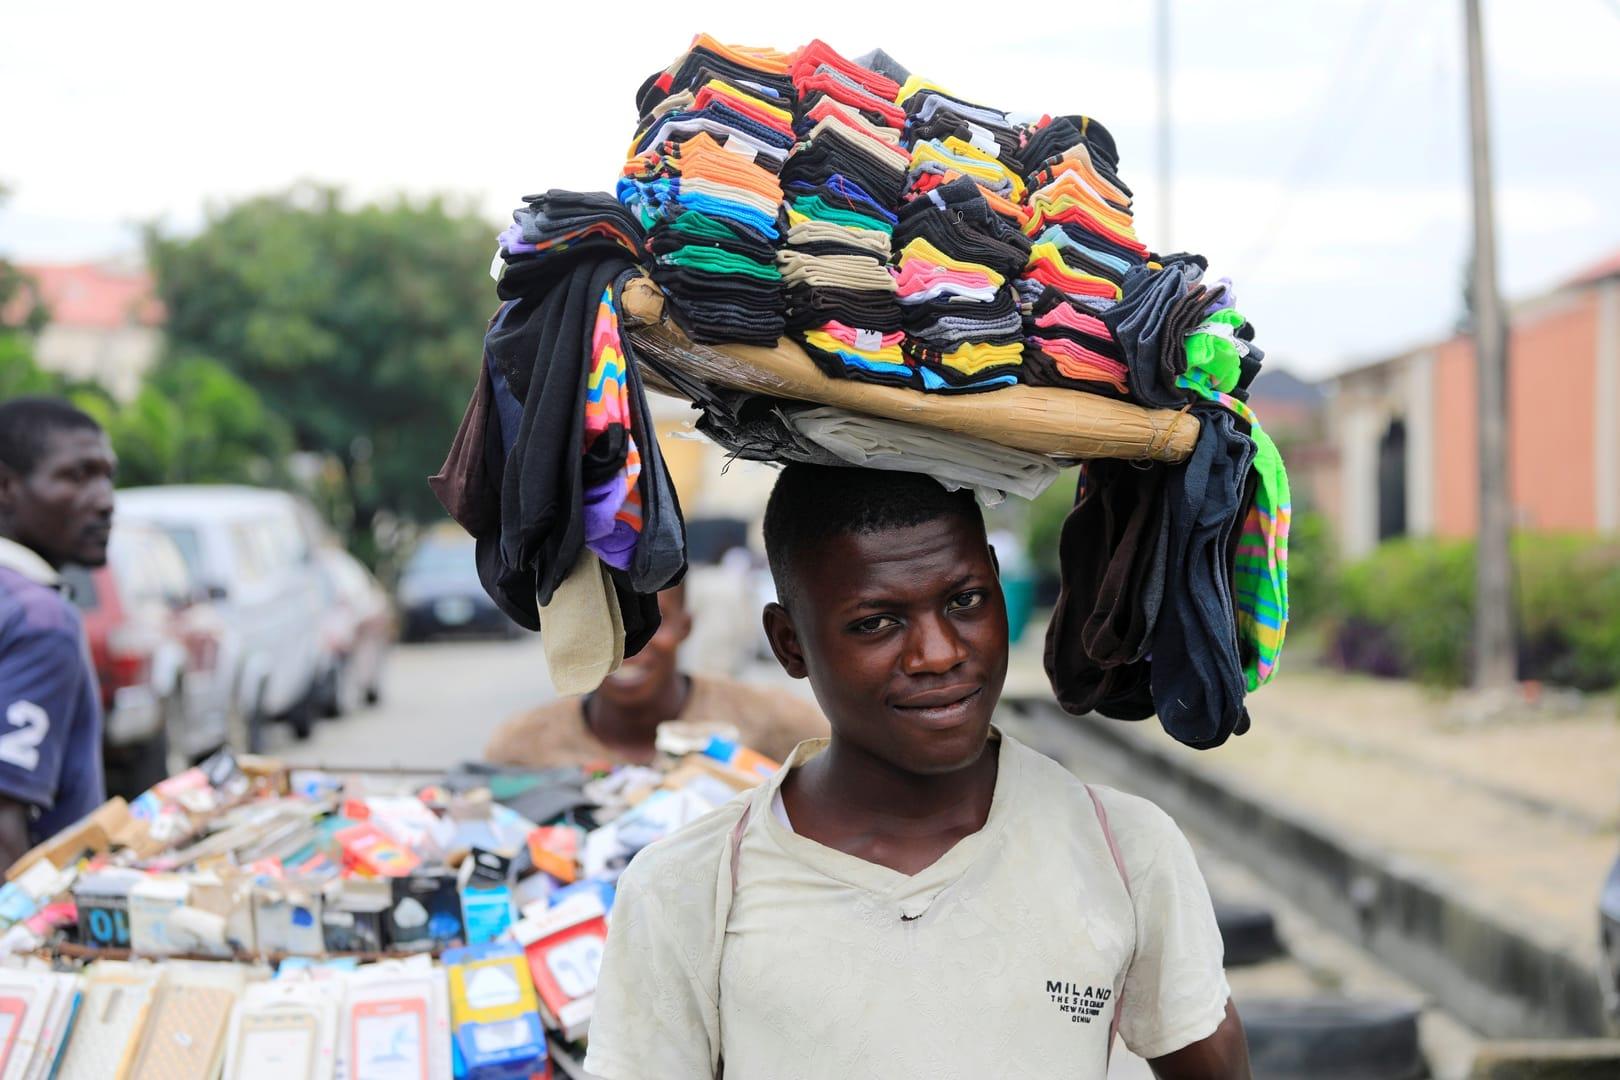 ‘Power imbalances’ must be tackled to defeat poverty in Nigeria, Christian Aid says